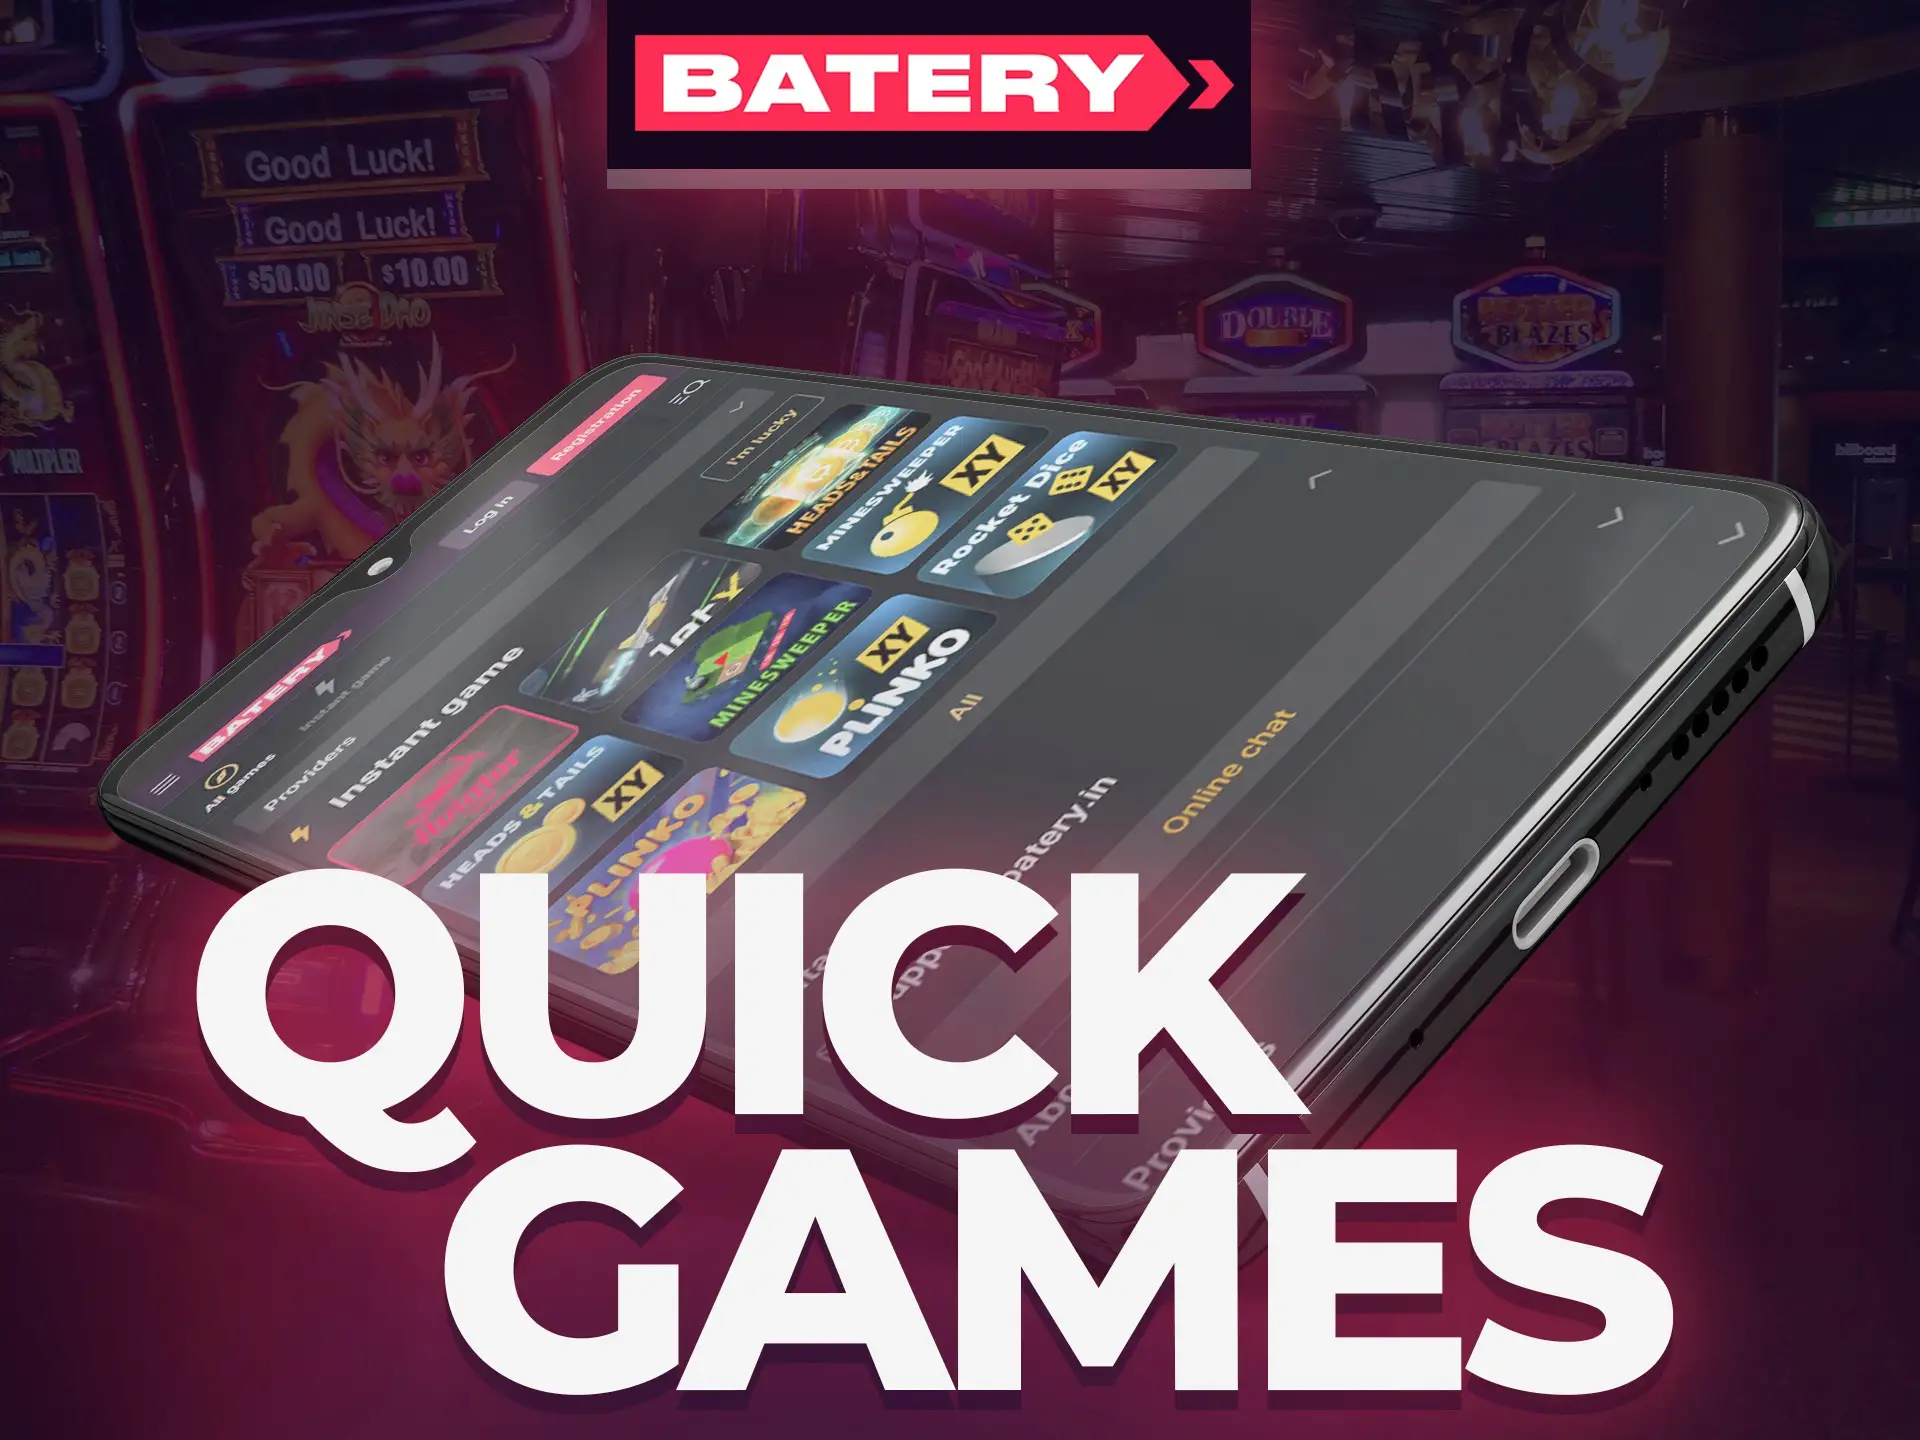 Play casino in quick format in Batery app.